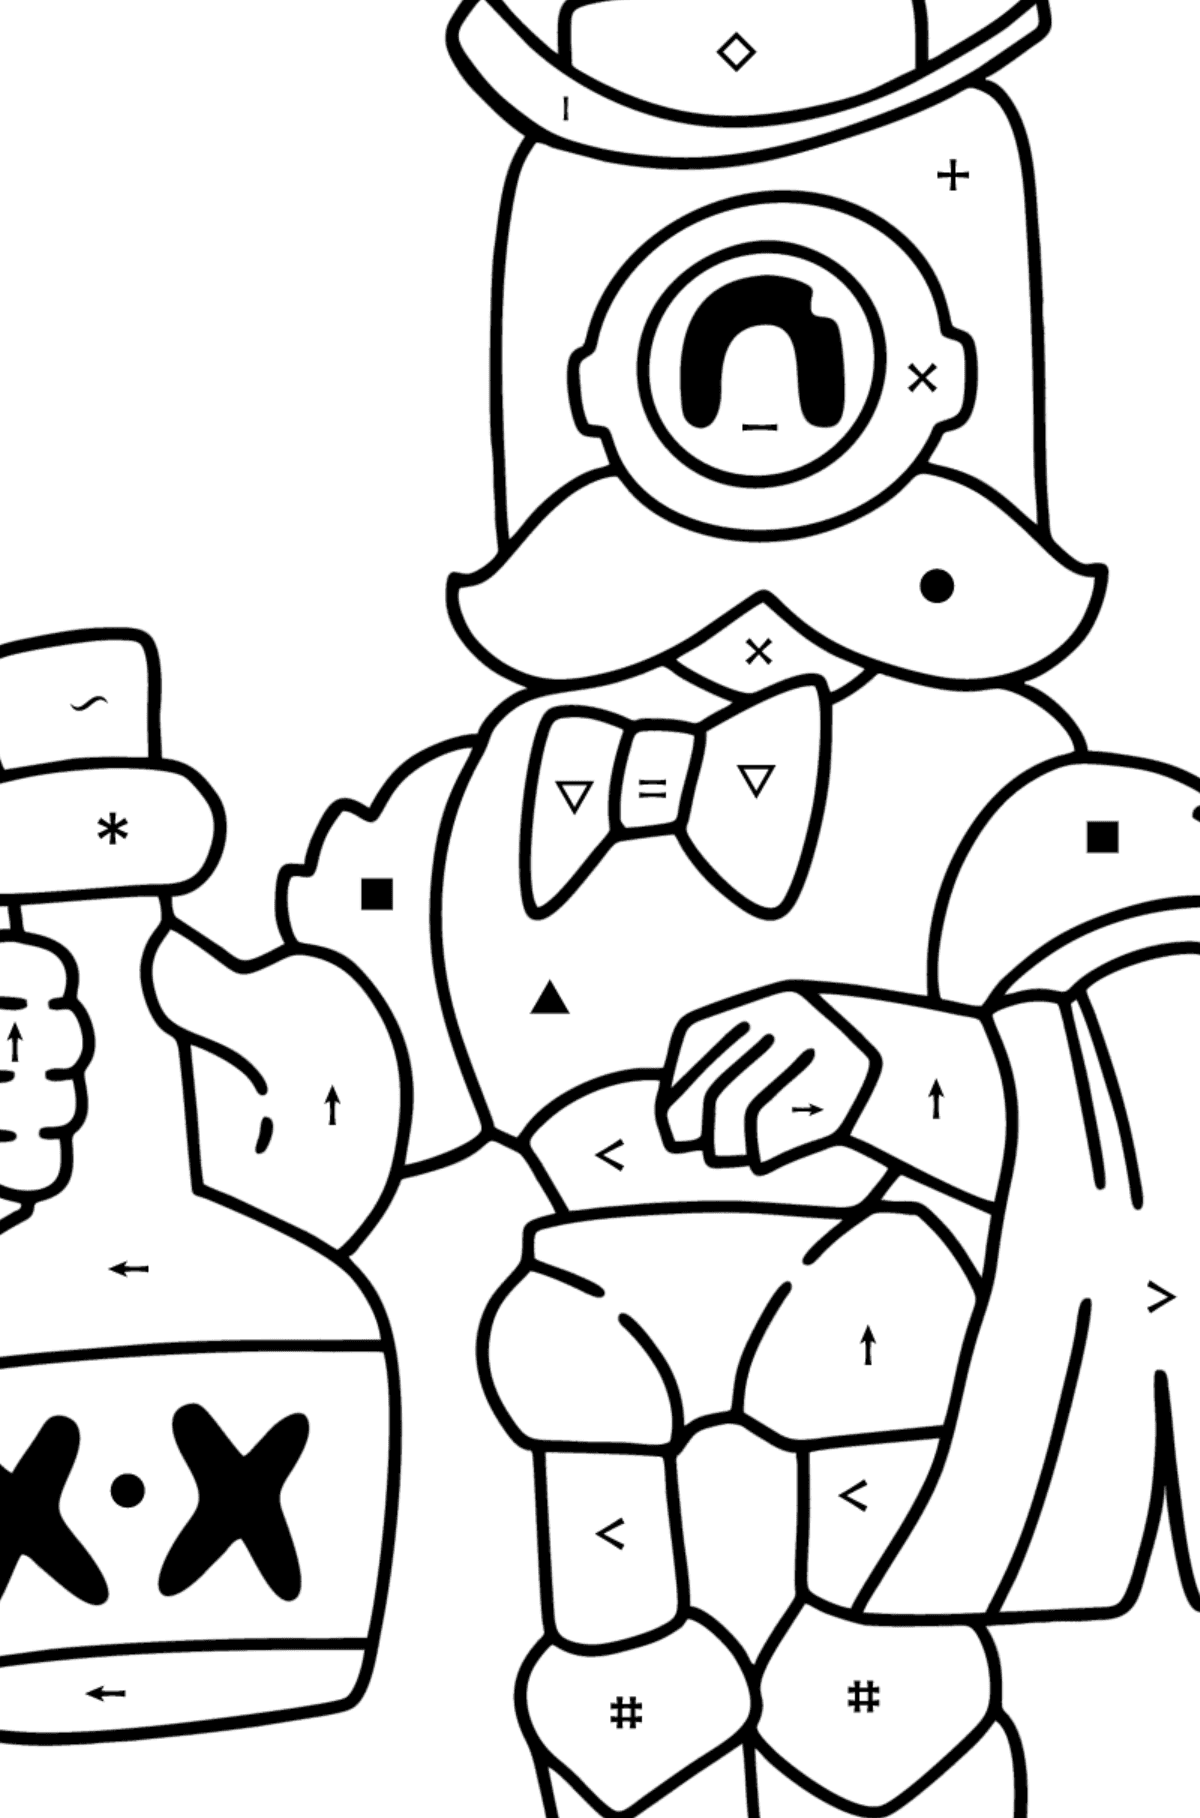 Brawl Stars Barley colouring page - Coloring by Symbols for Kids